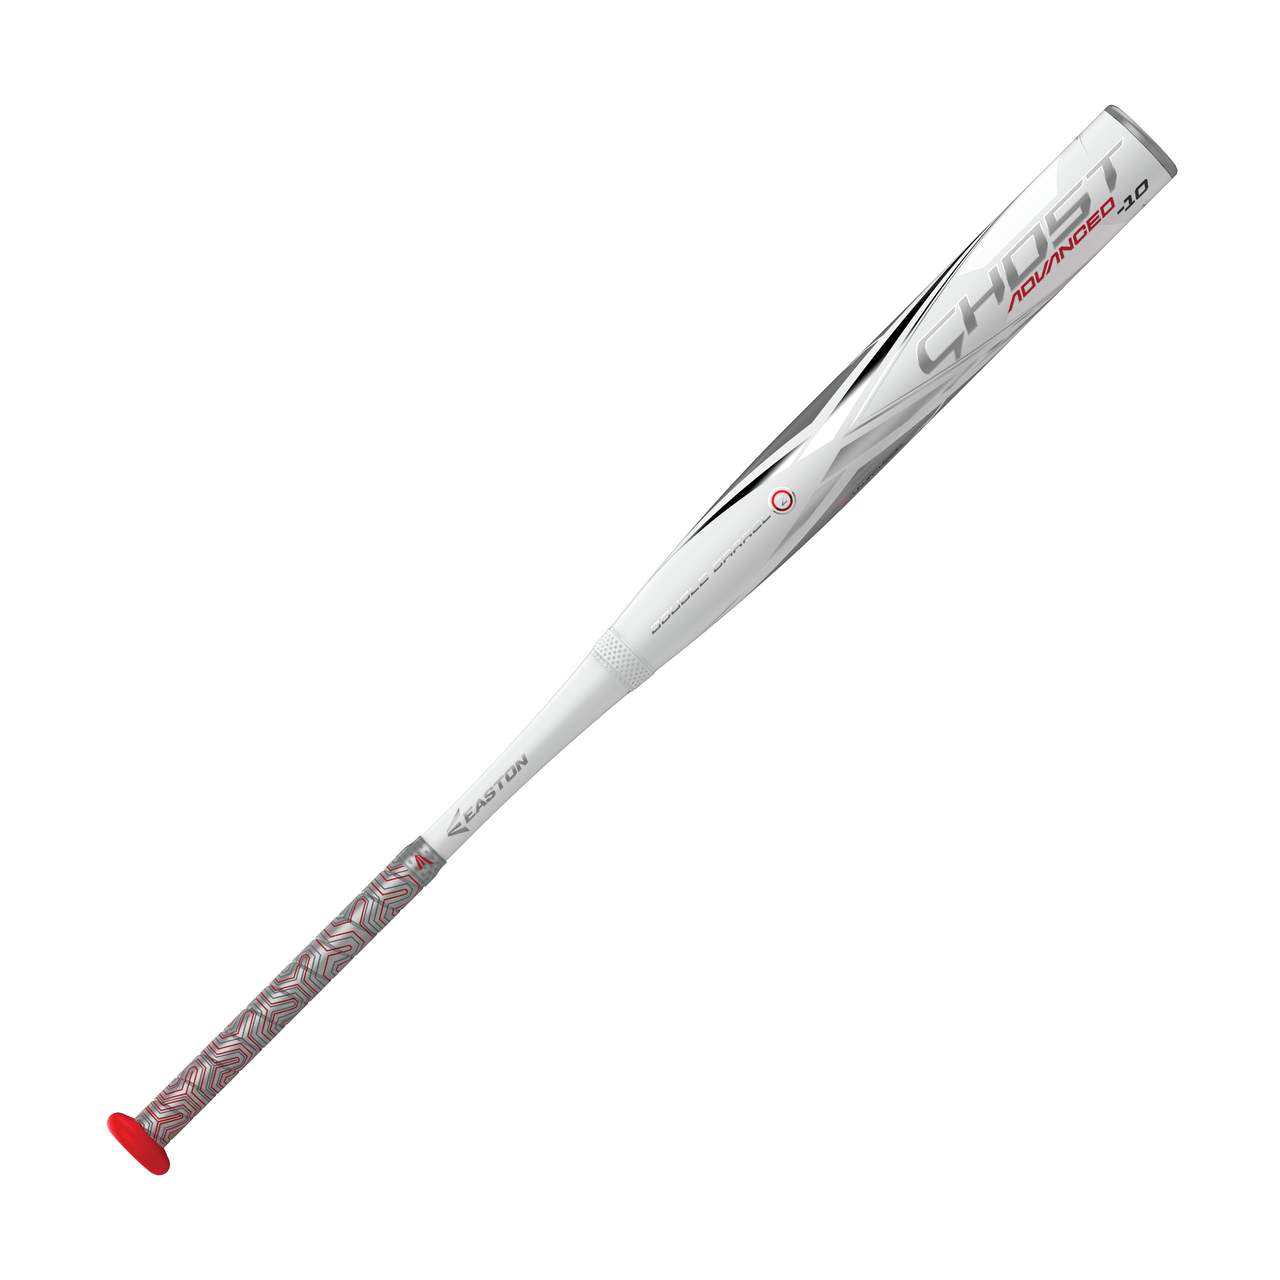 New Easton Ghost Advanced with Free Shipping